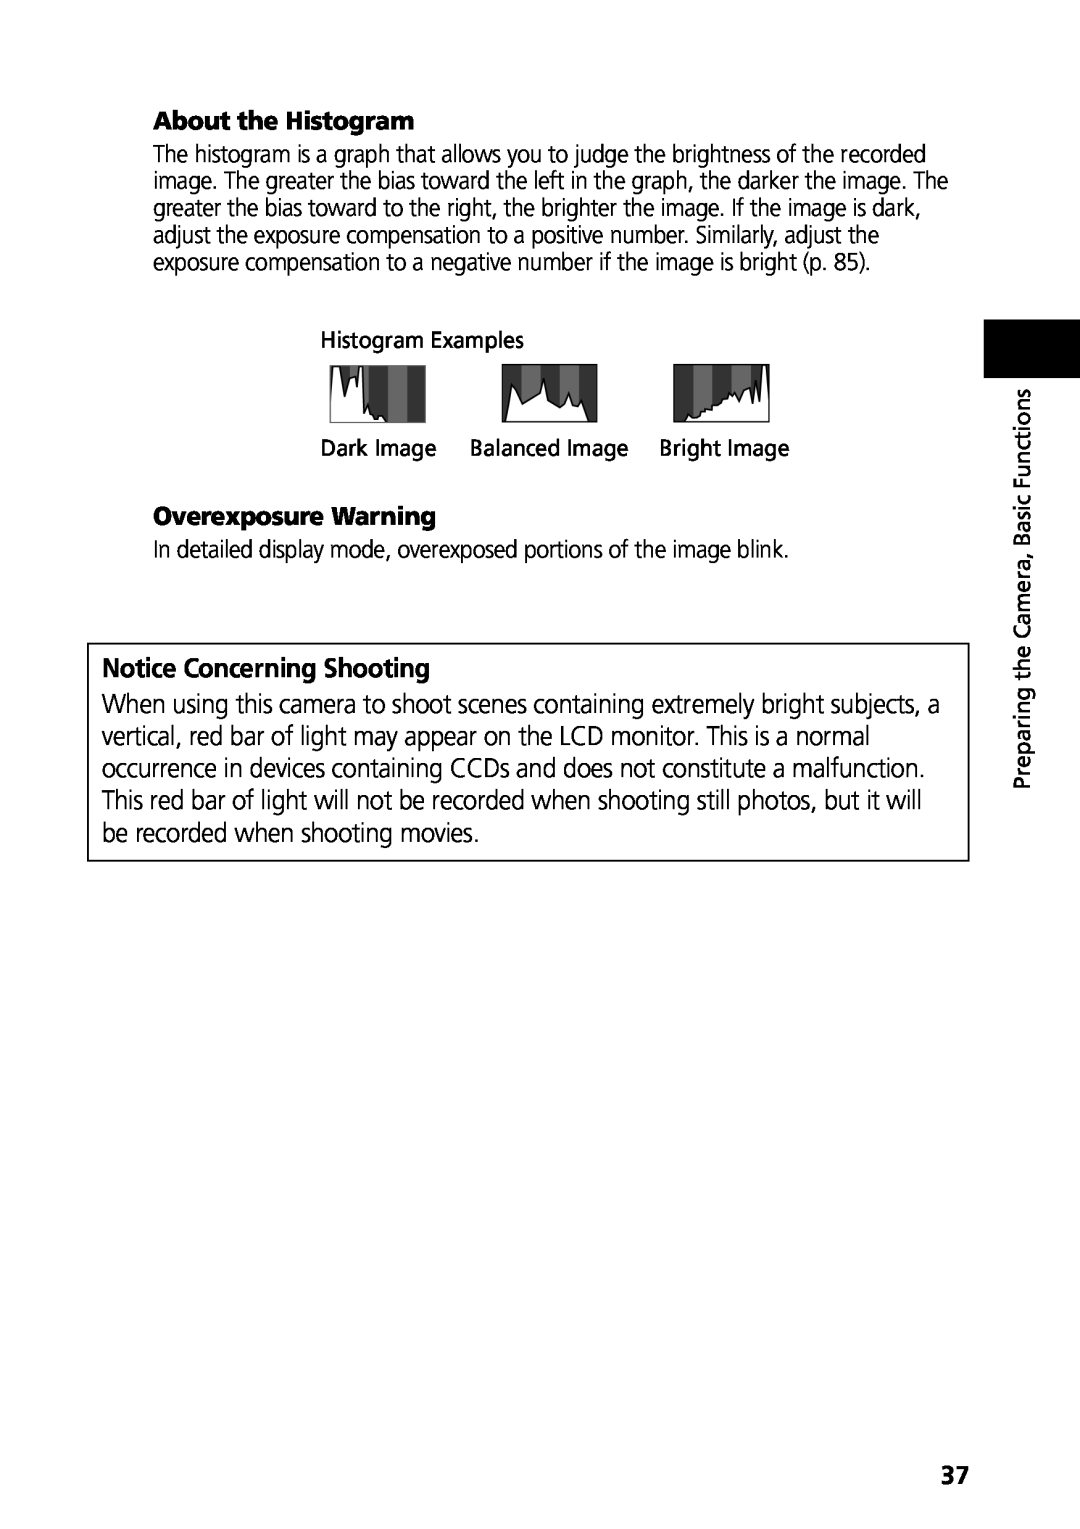 Canon G3 manual Notice Concerning Shooting, About the Histogram, Overexposure Warning 